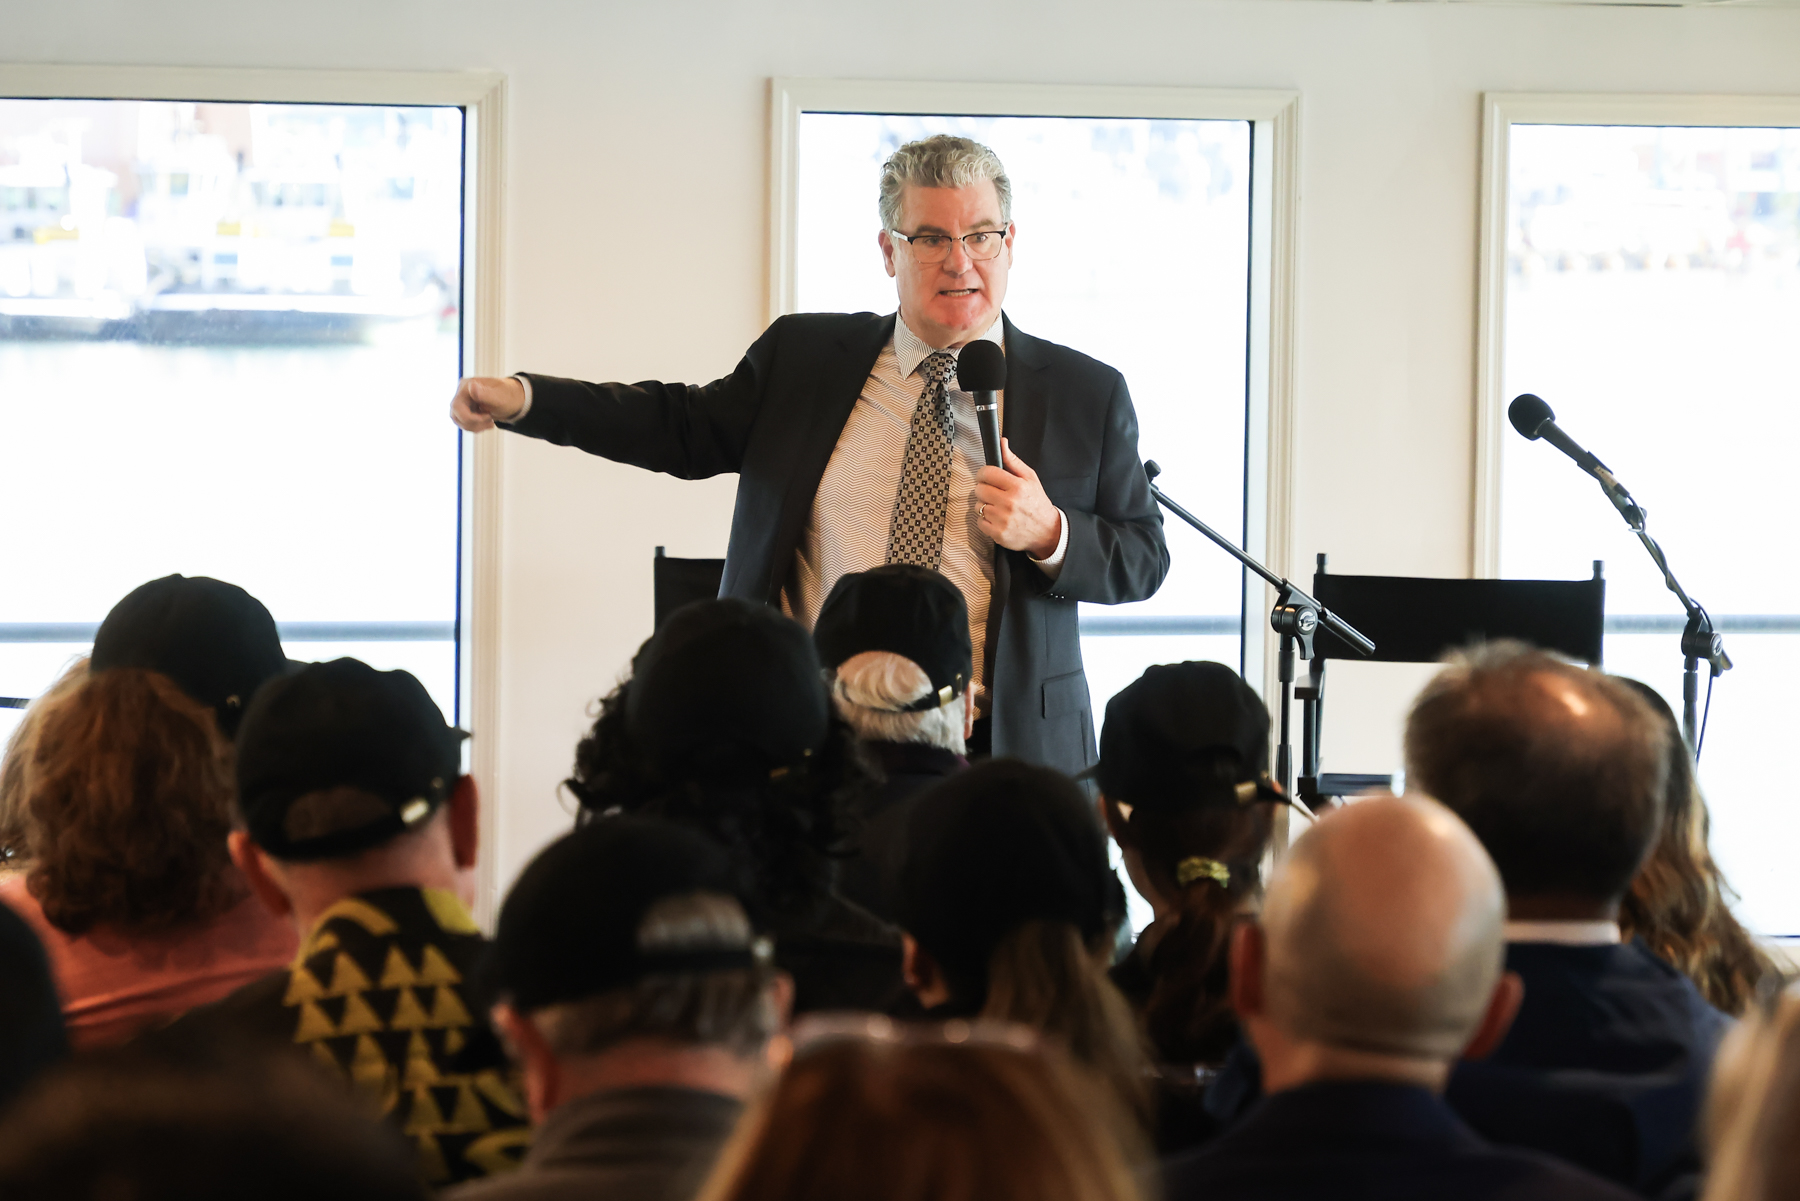 Photo of City Councilmember Tim McOsker speaking in front of a crowd aboard a boat